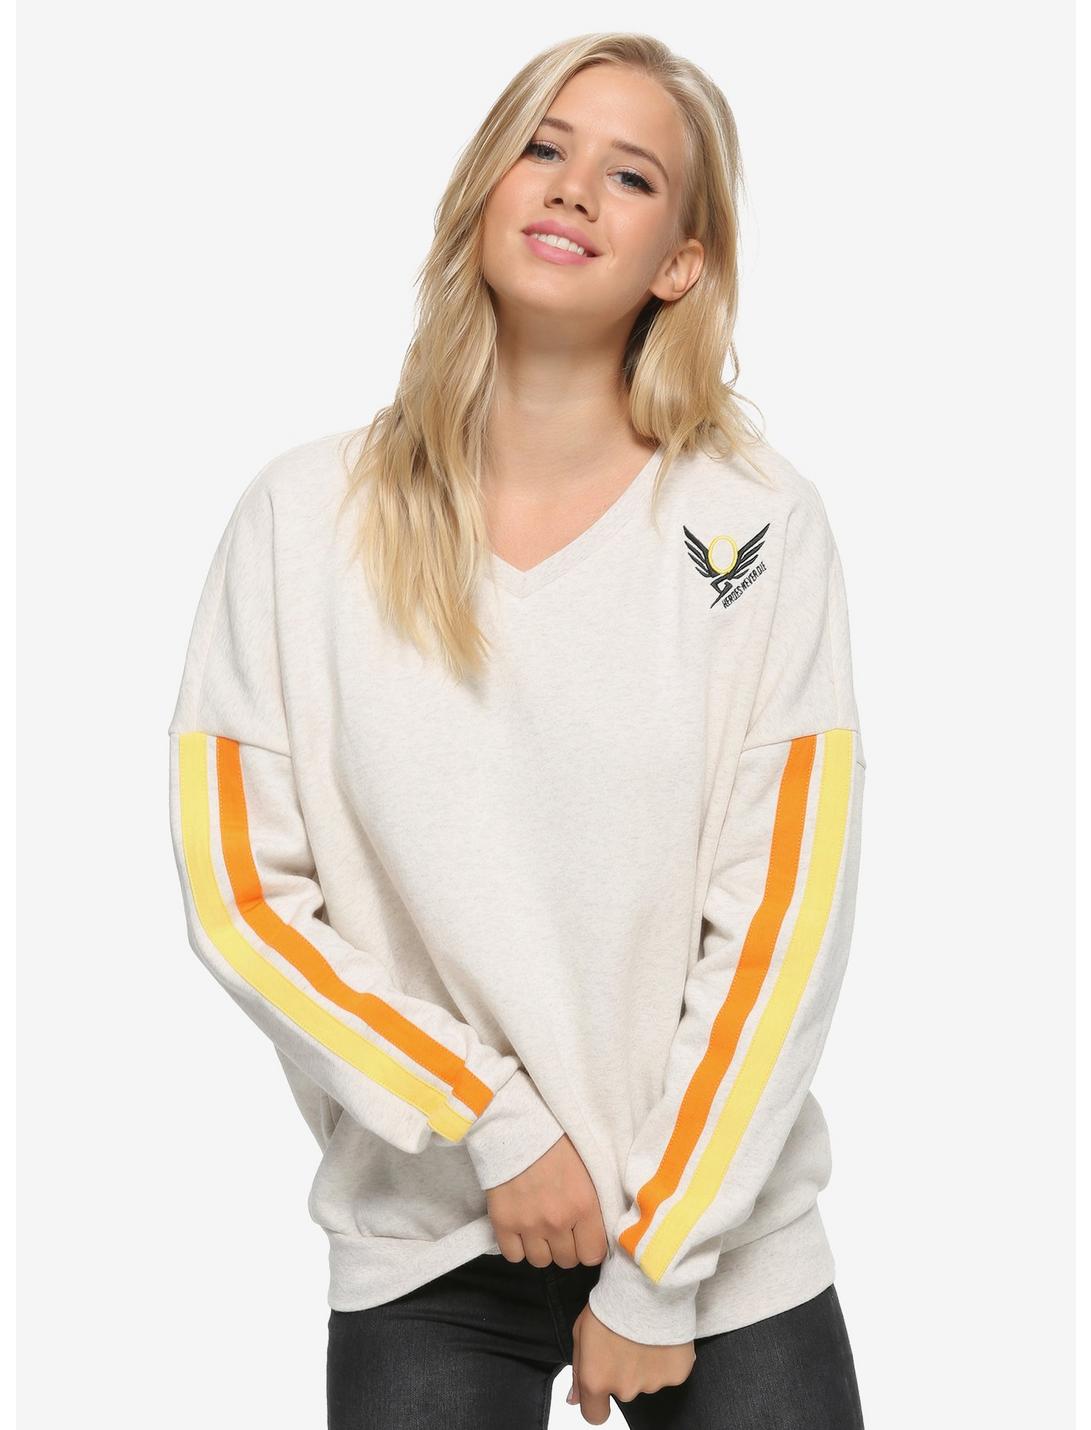 Our Universe Overwatch Mercy Taped V-Neck Crewneck, MULTI, hi-res